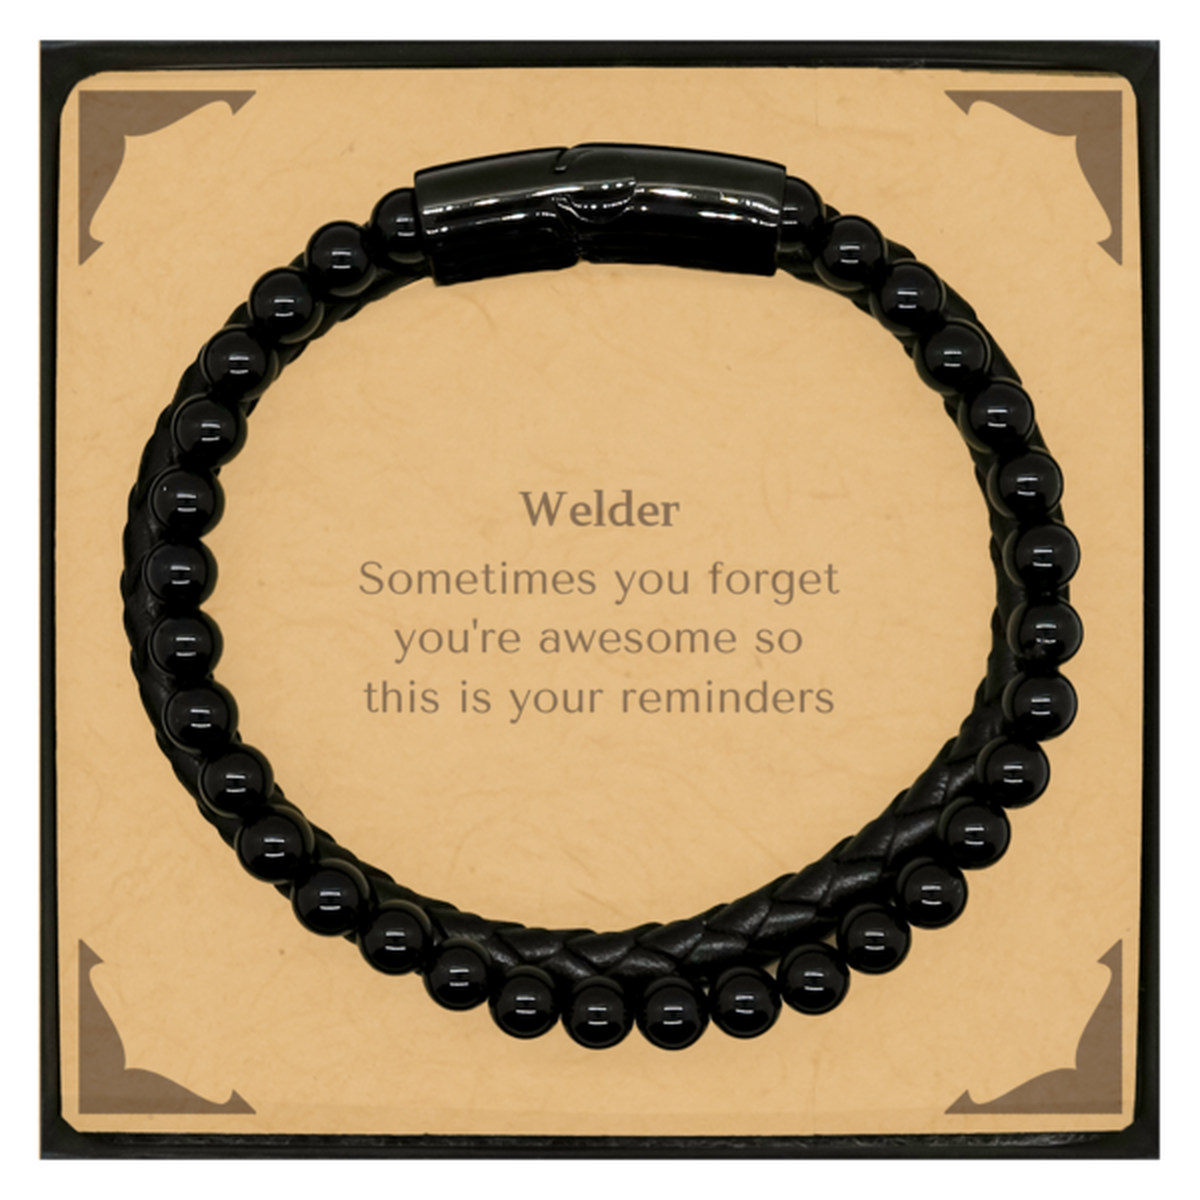 Sentimental Welder Stone Leather Bracelets, Welder Sometimes you forget you're awesome so this is your reminders, Graduation Christmas Birthday Gifts for Welder, Men, Women, Coworkers